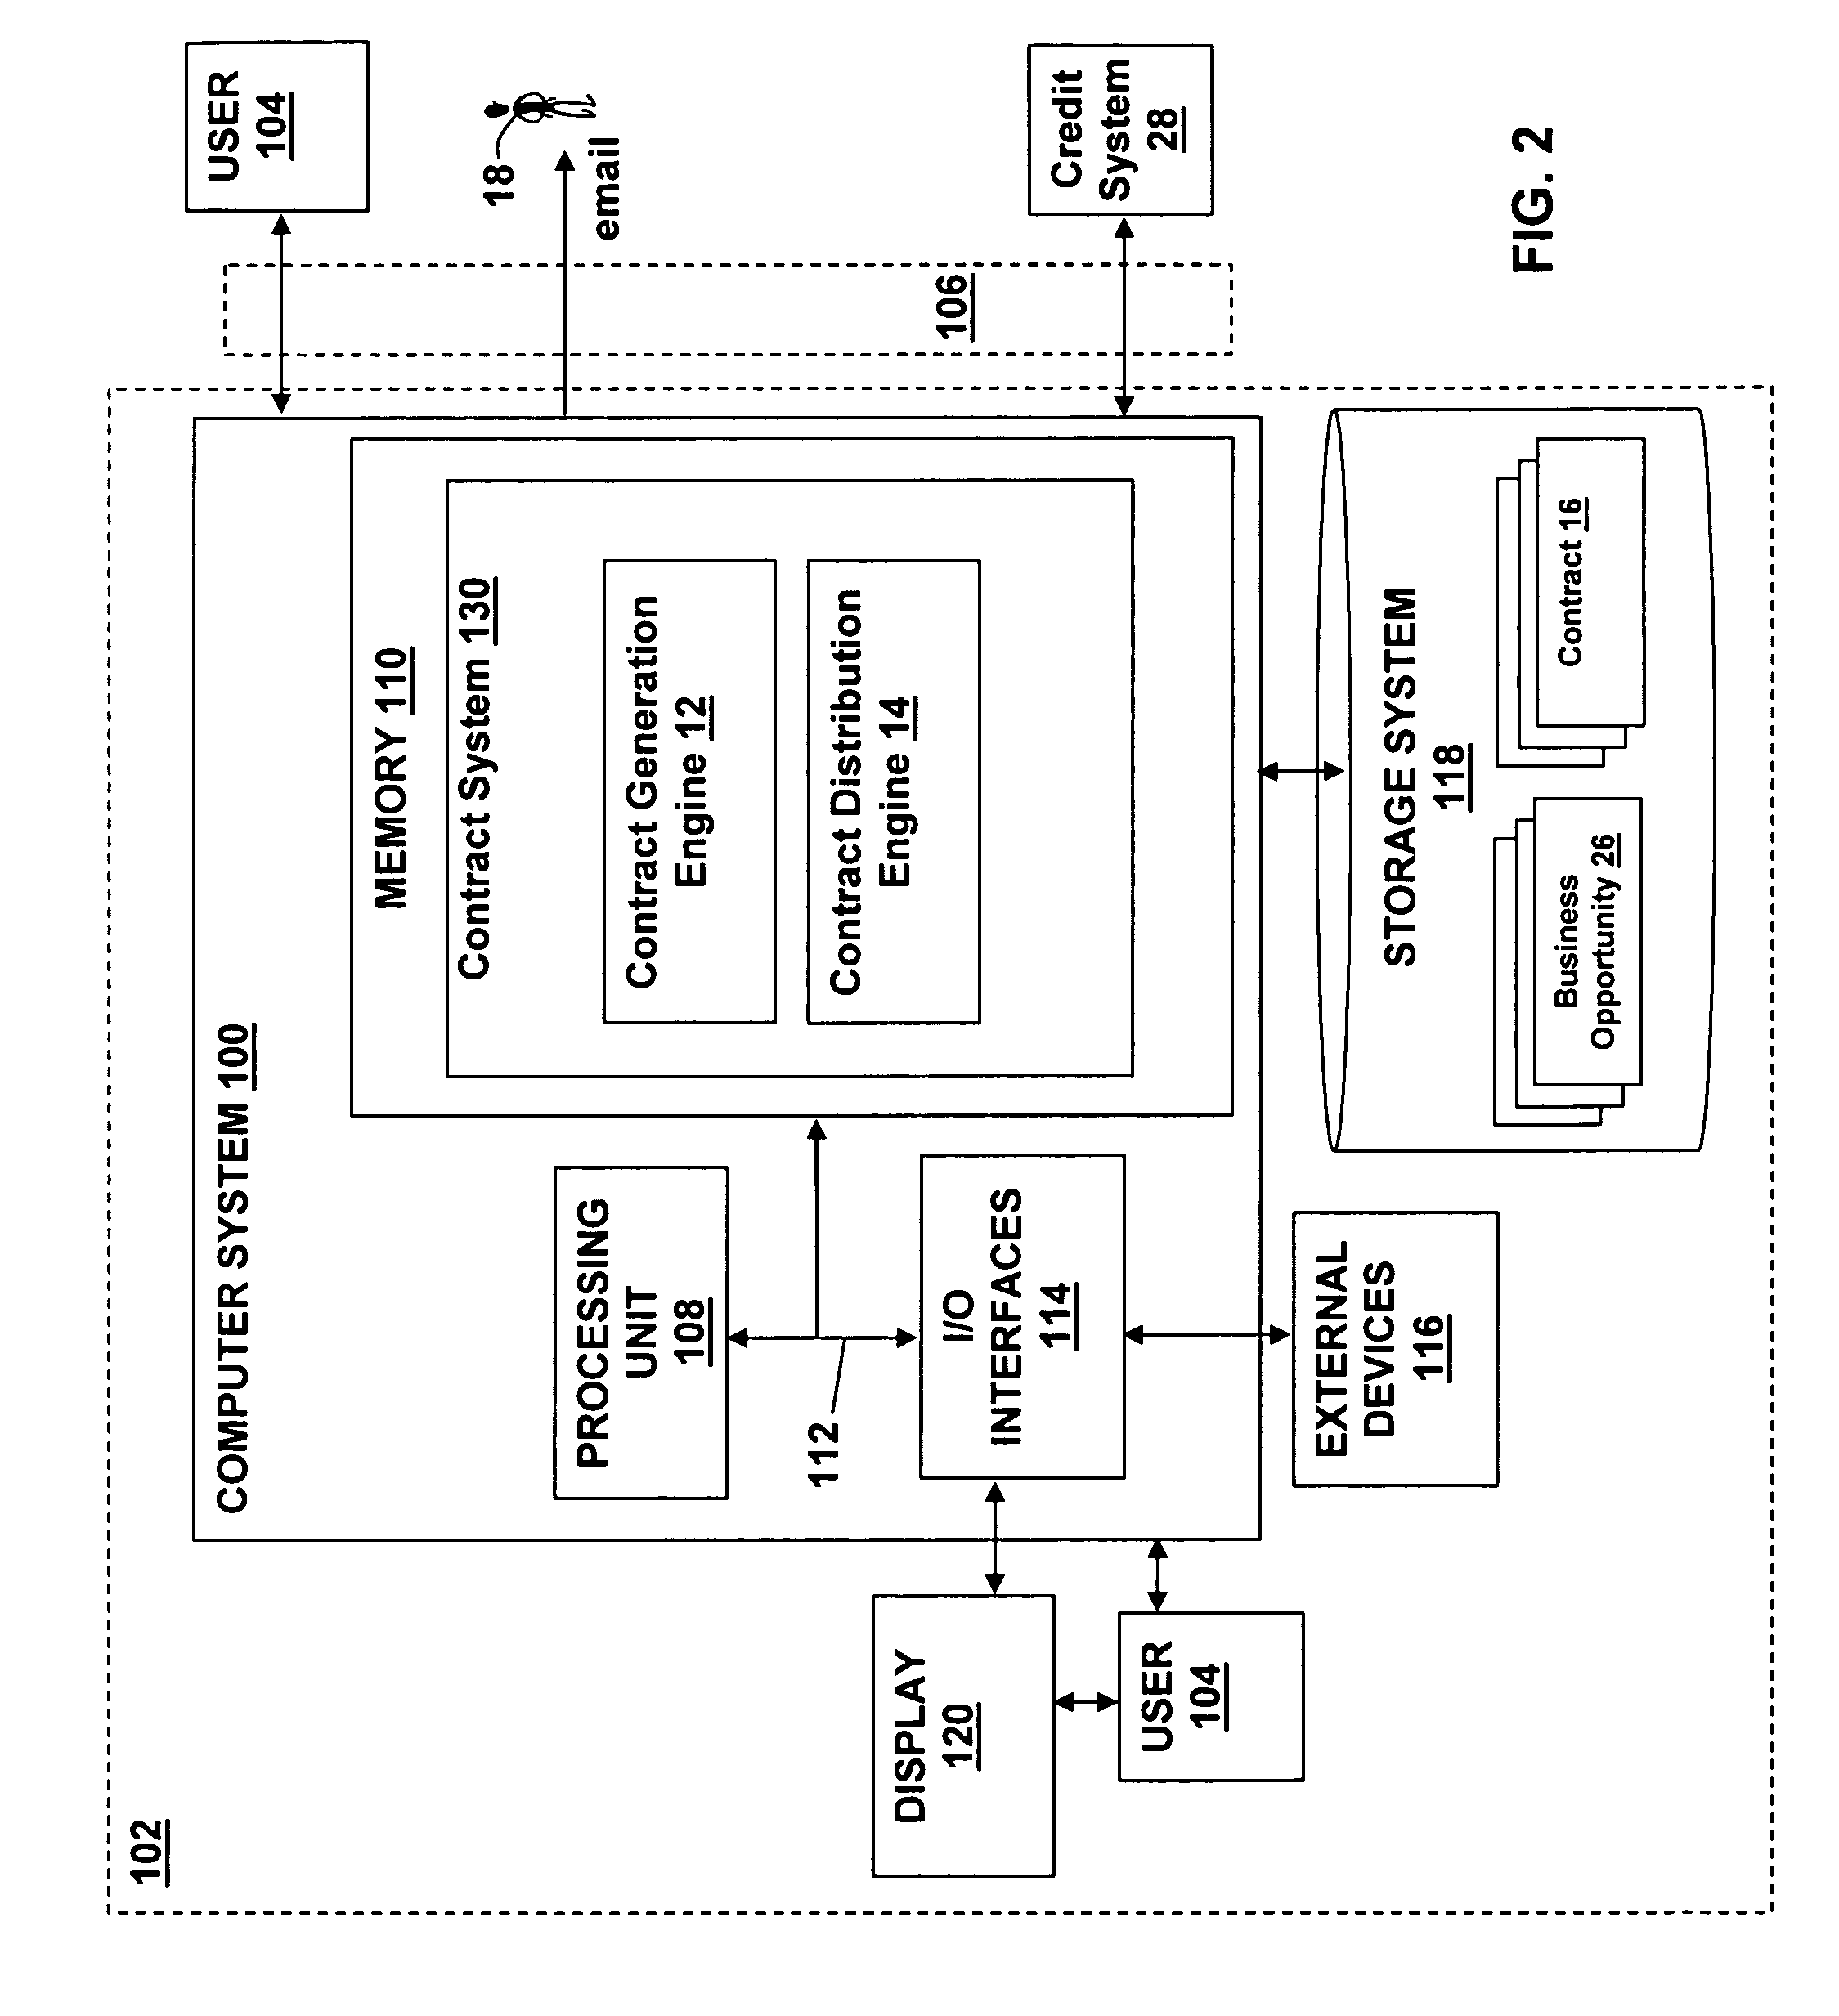 Method, system, and computer program product for on-demand creation and distribution of customized dynamic contracts